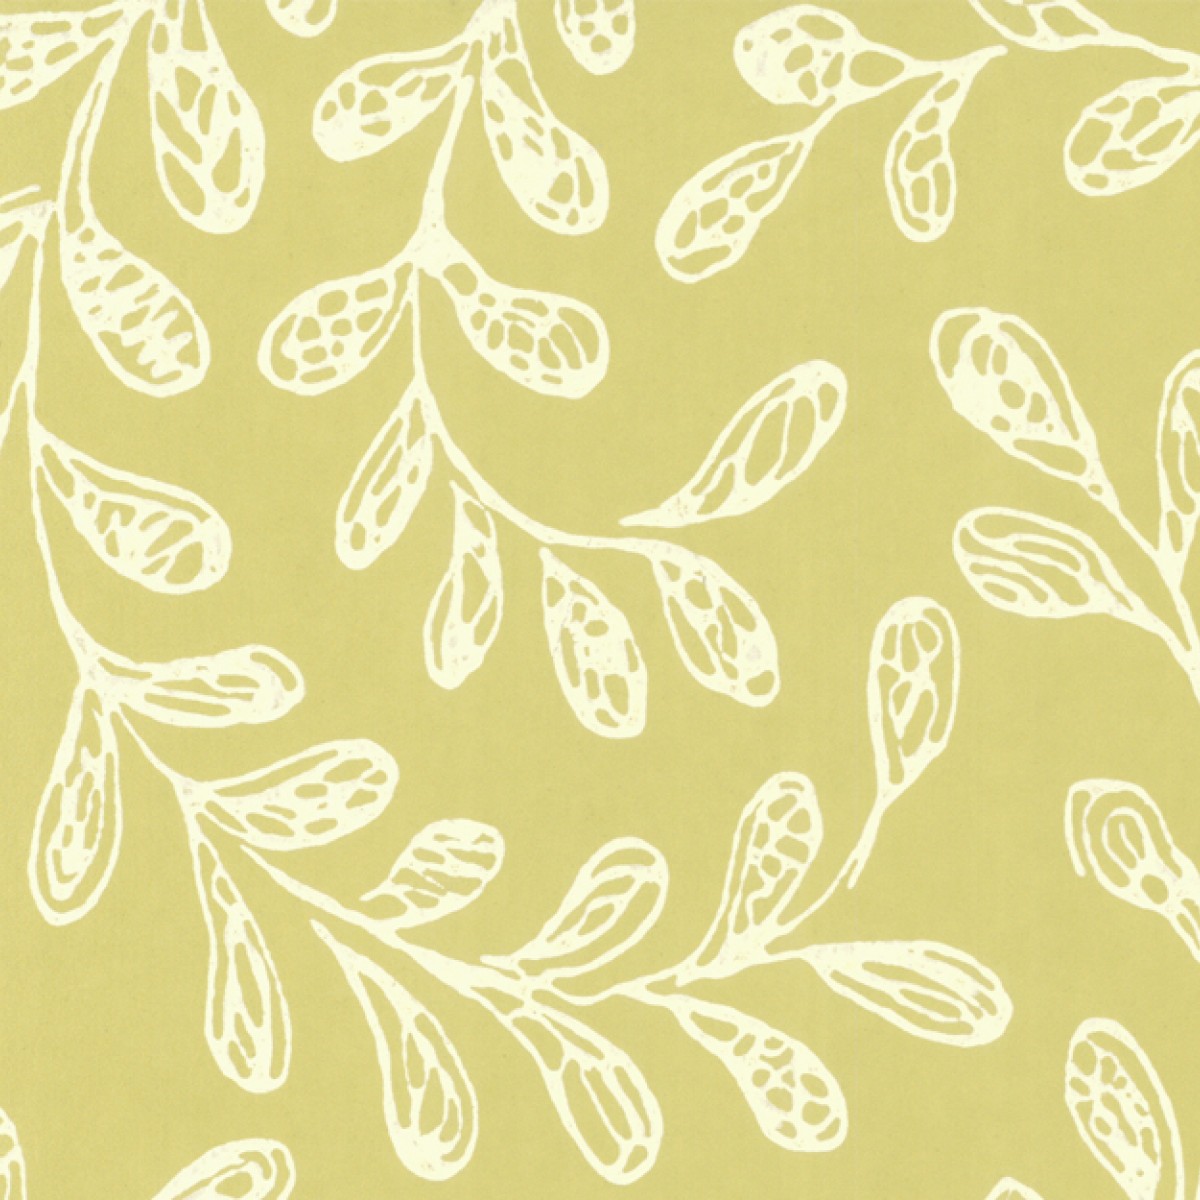 Tapet Audley, Yellow Luxury Leaf, 1838 Wallcoverings, 5.3mp / rola, Tapet living 